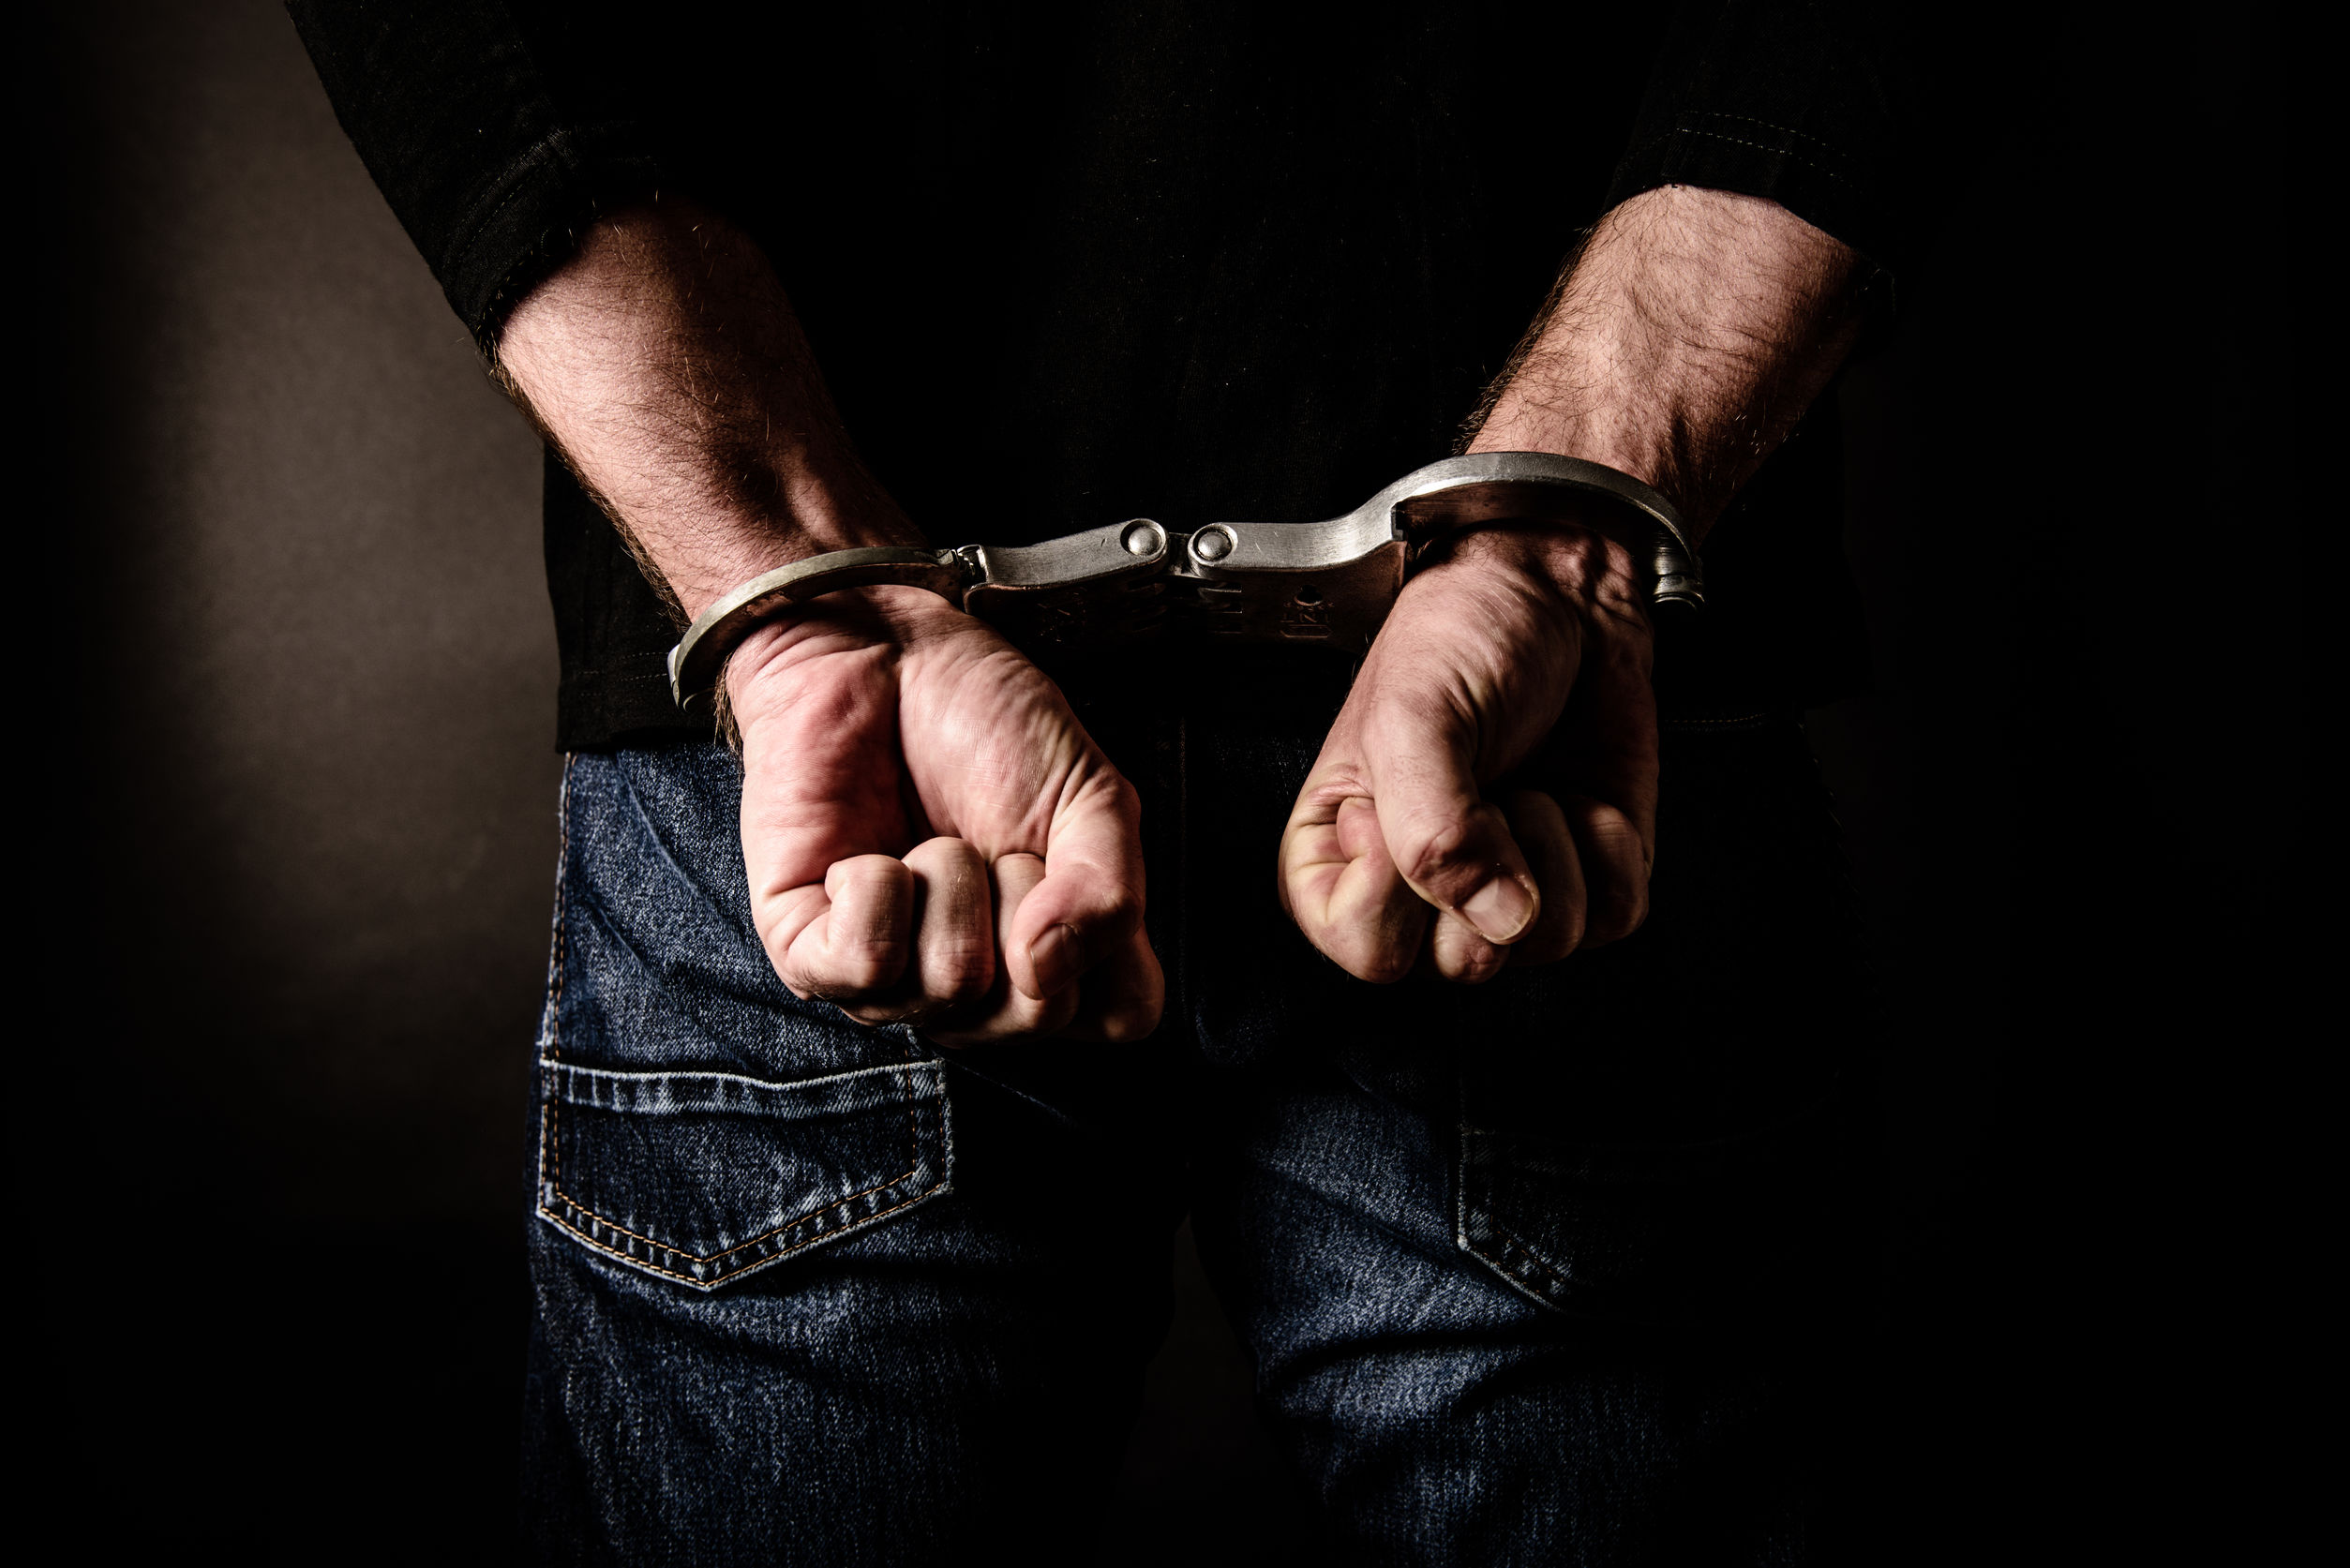 Arrested criminal with handcuffs